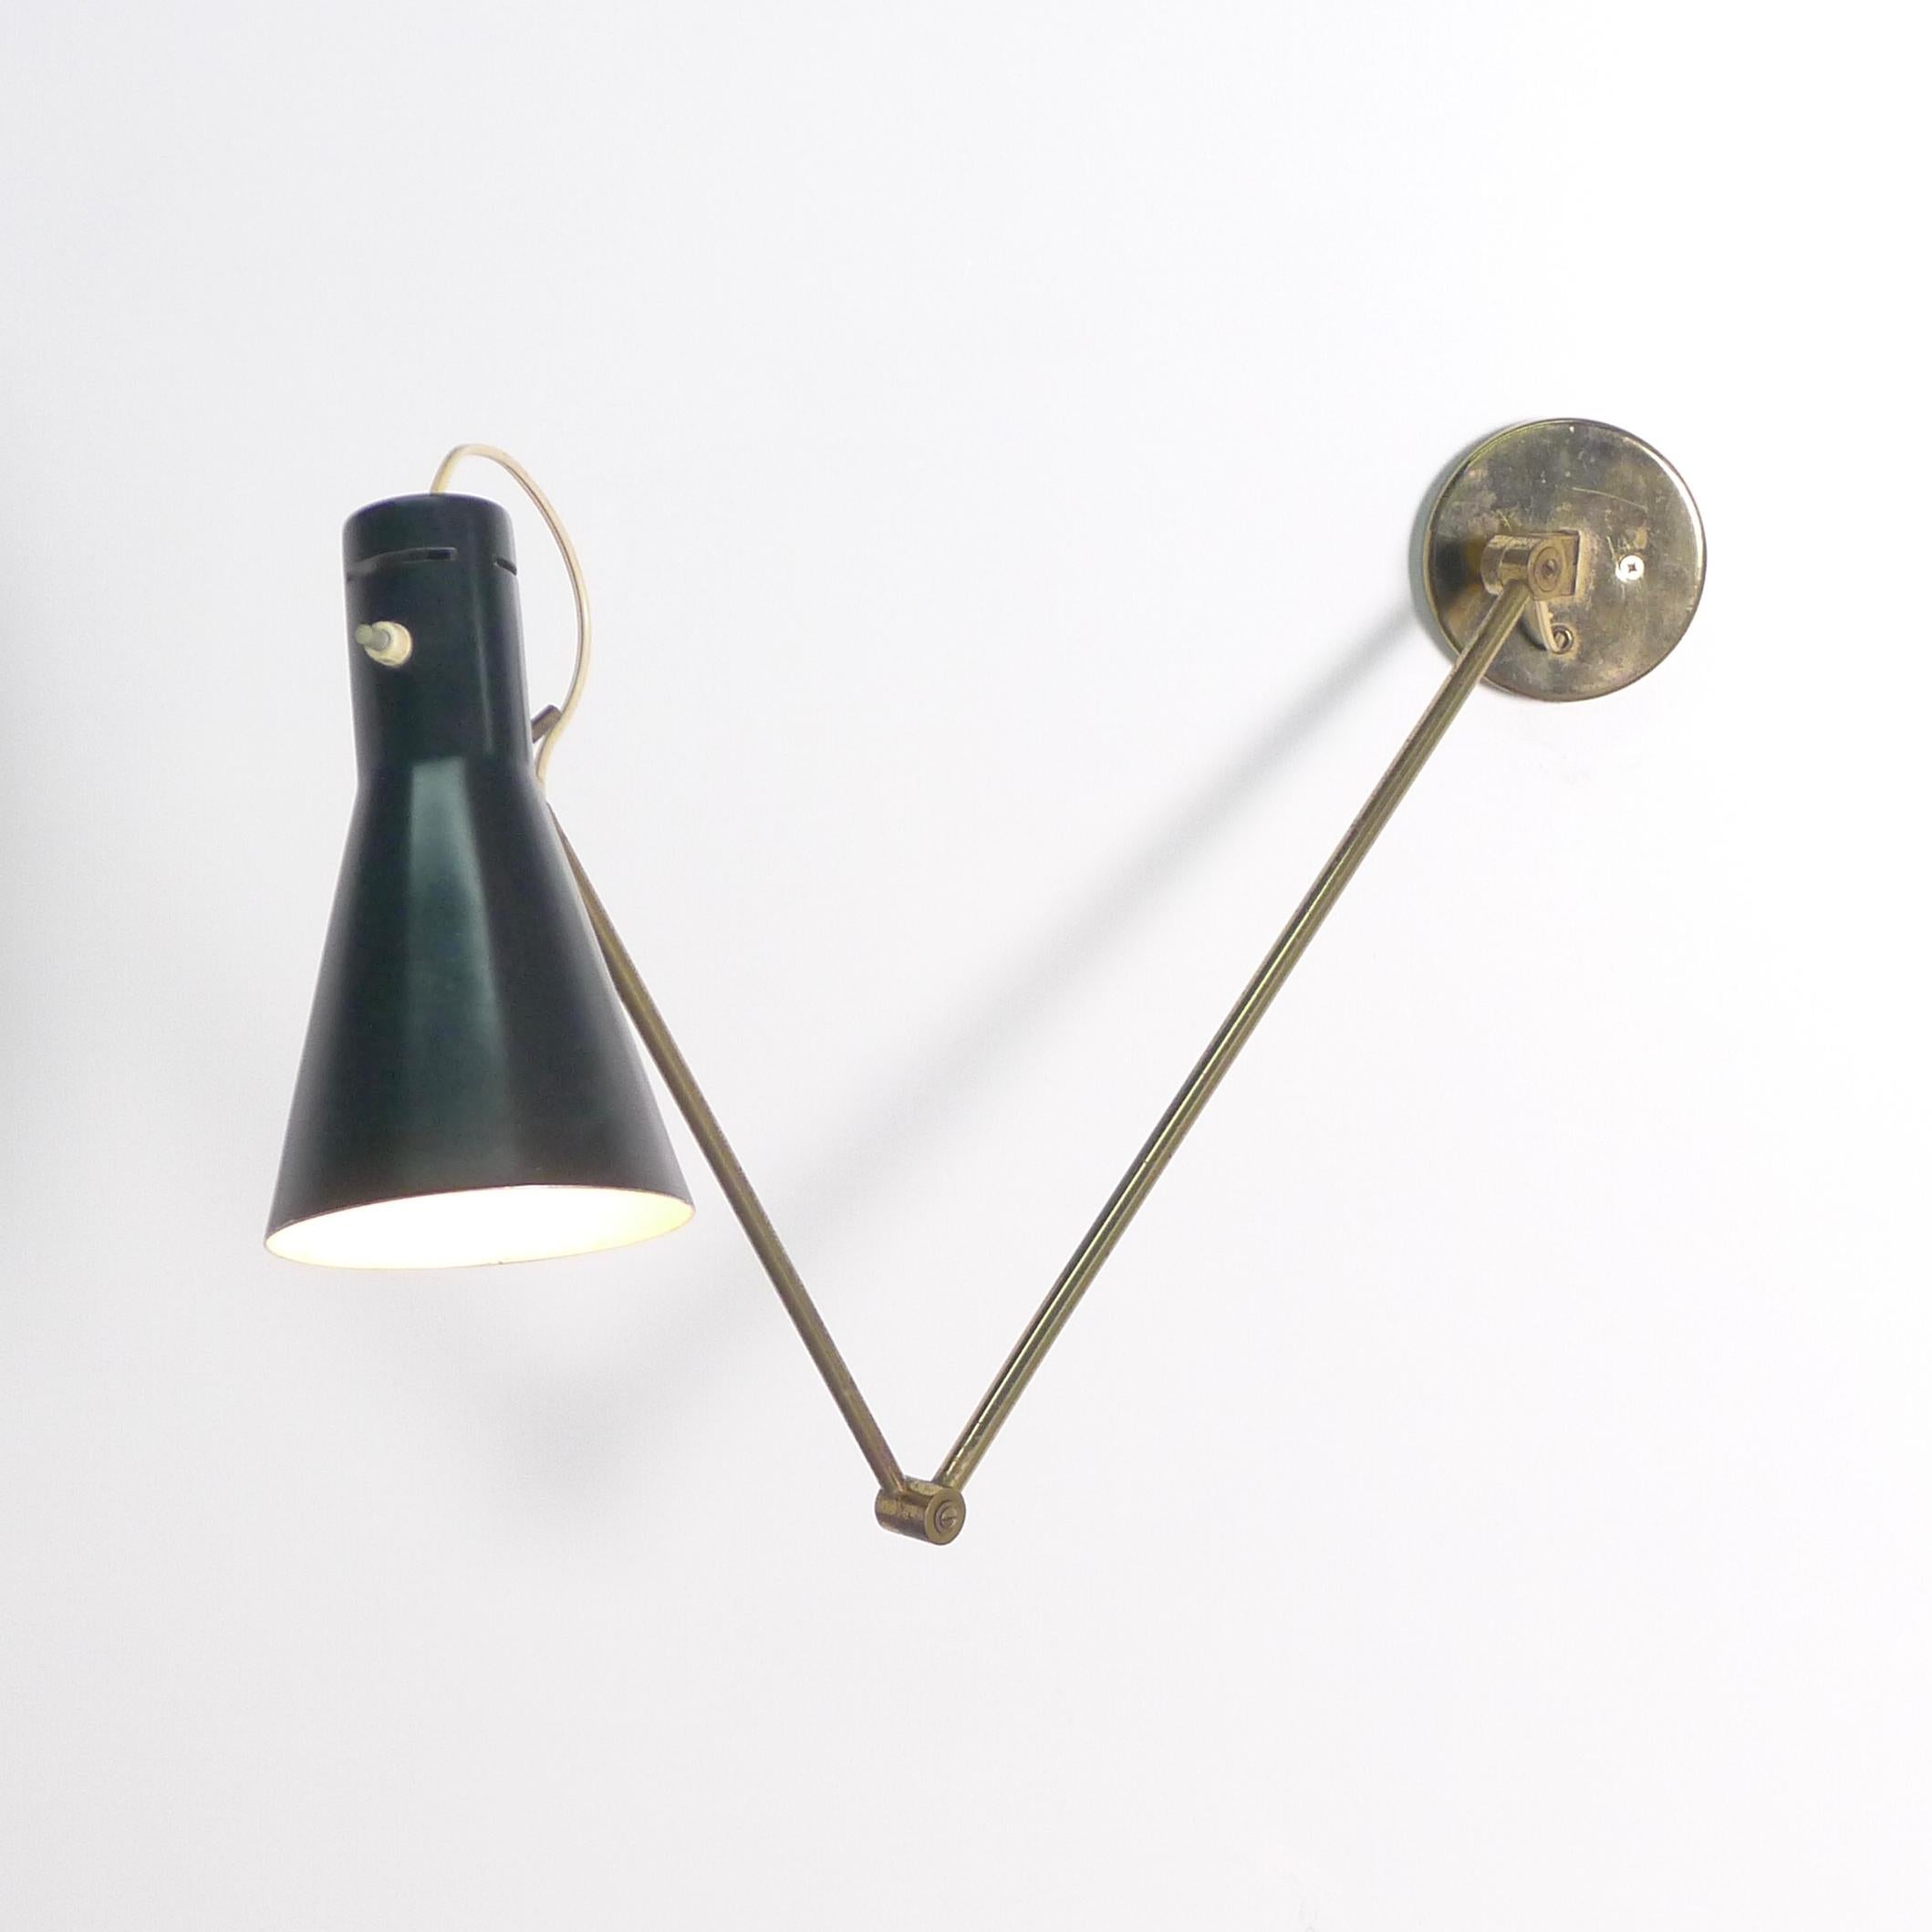 Vittoriano Vigano for Arteluce, Rare Articulated Wall Light, Italian 1950s For Sale 6